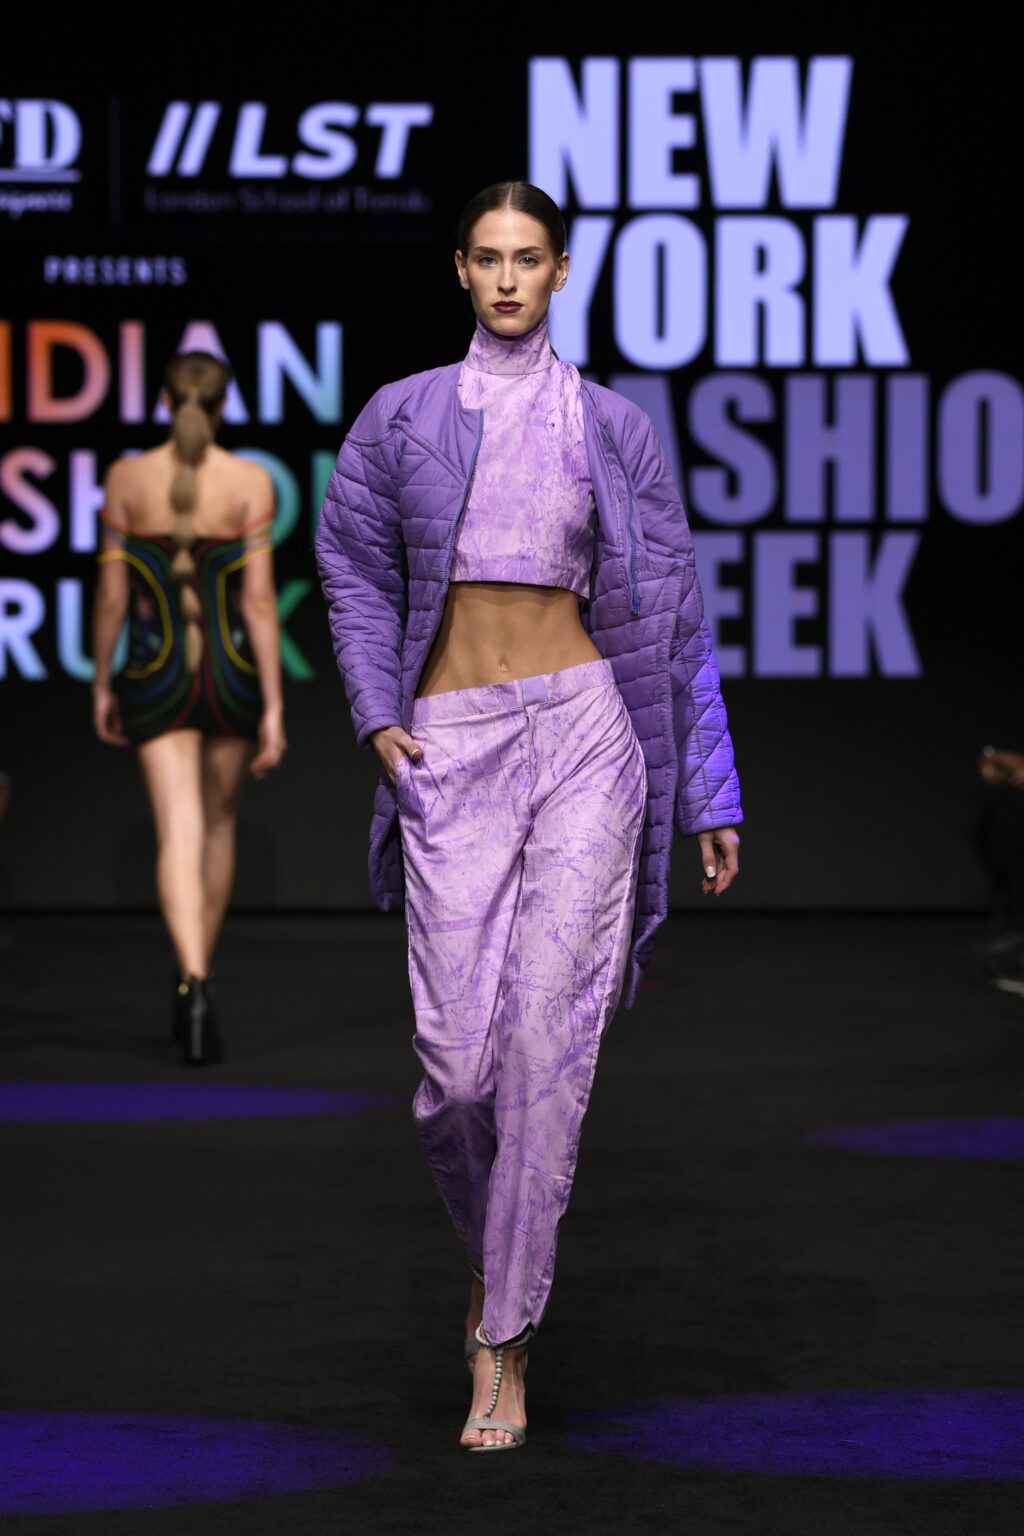 NEW YORK, NEW YORK - FEBRUARY 12: Rachel Winters walks the runway wearing INIFD-LST India Fashion Trunk - At New York Fashion Week Powered By Art Hearts Fashion at The Ziegfeld Ballroom on February 12, 2022 in New York City. (Photo by Arun Nevader/Getty Images for Art Hearts Fashion)